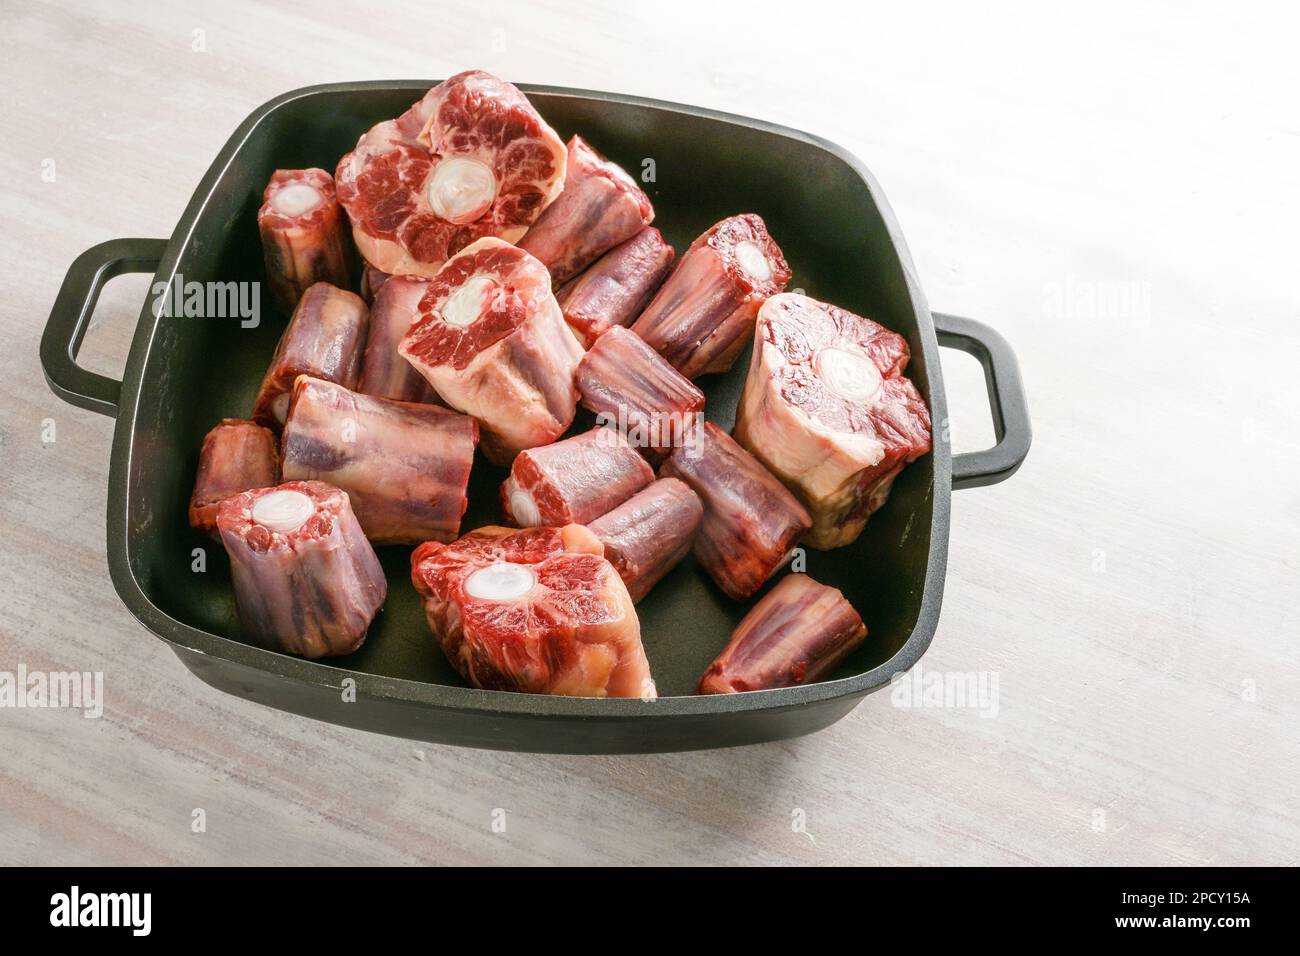 Raw oxtail pieces with bone in a black tray, gelatin-rich meat traditional for a slow-cooking stew or stock base for oxtail soup, copy space, selected Stock Photo